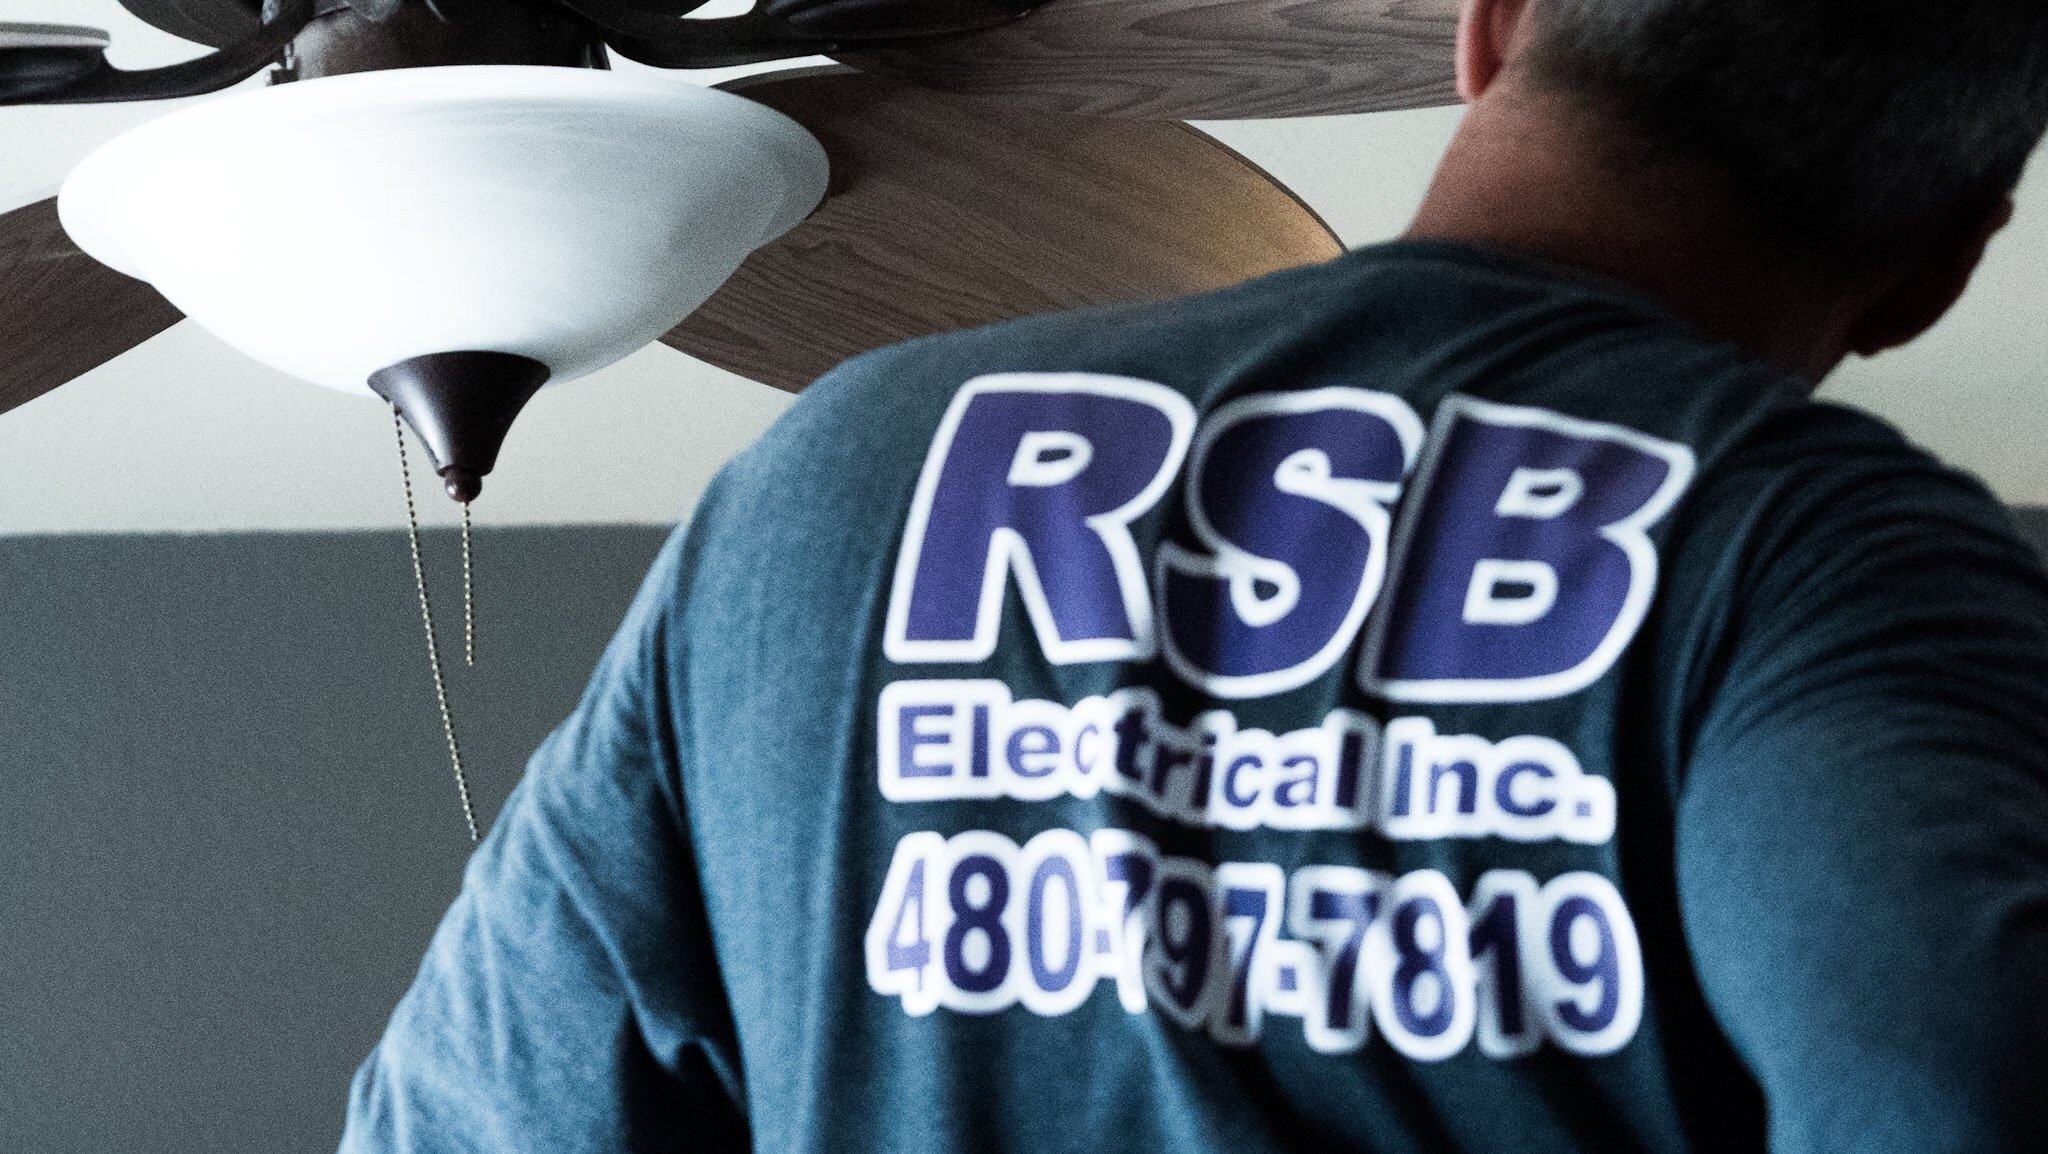 UNDERSTANDING THE COLOR CODES ON ELECTRICAL WIRES — RSB Electrical Inc.